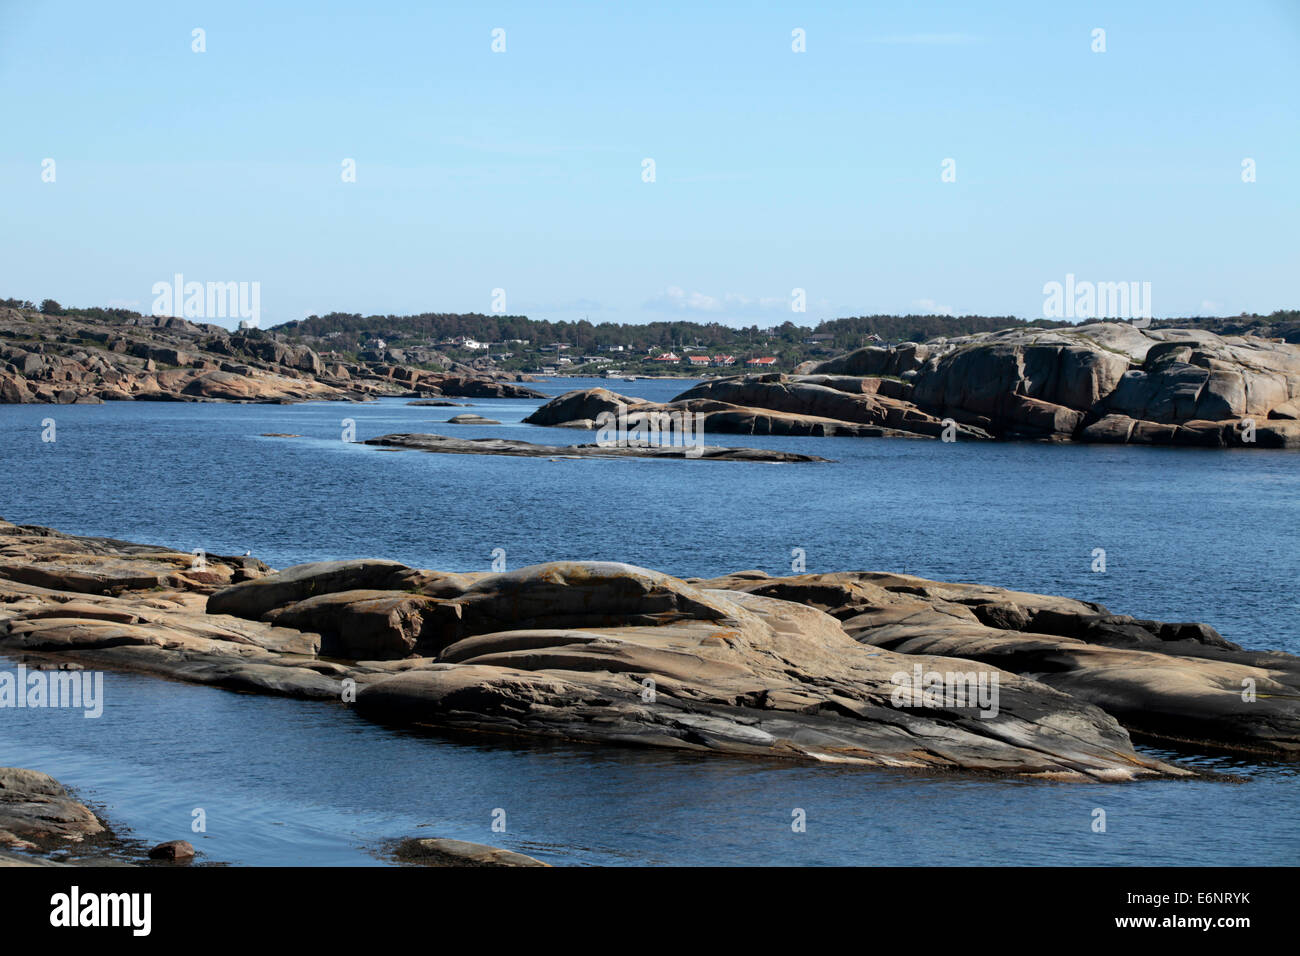 The skerries at Verdens Ende are numerous and a magic of nature. The Norwegian end of the world - or 'Verdens Ende' - is located in the Oslo fjord. Photo: Klaus Nowottnick Date: June 6, 2014 Stock Photo